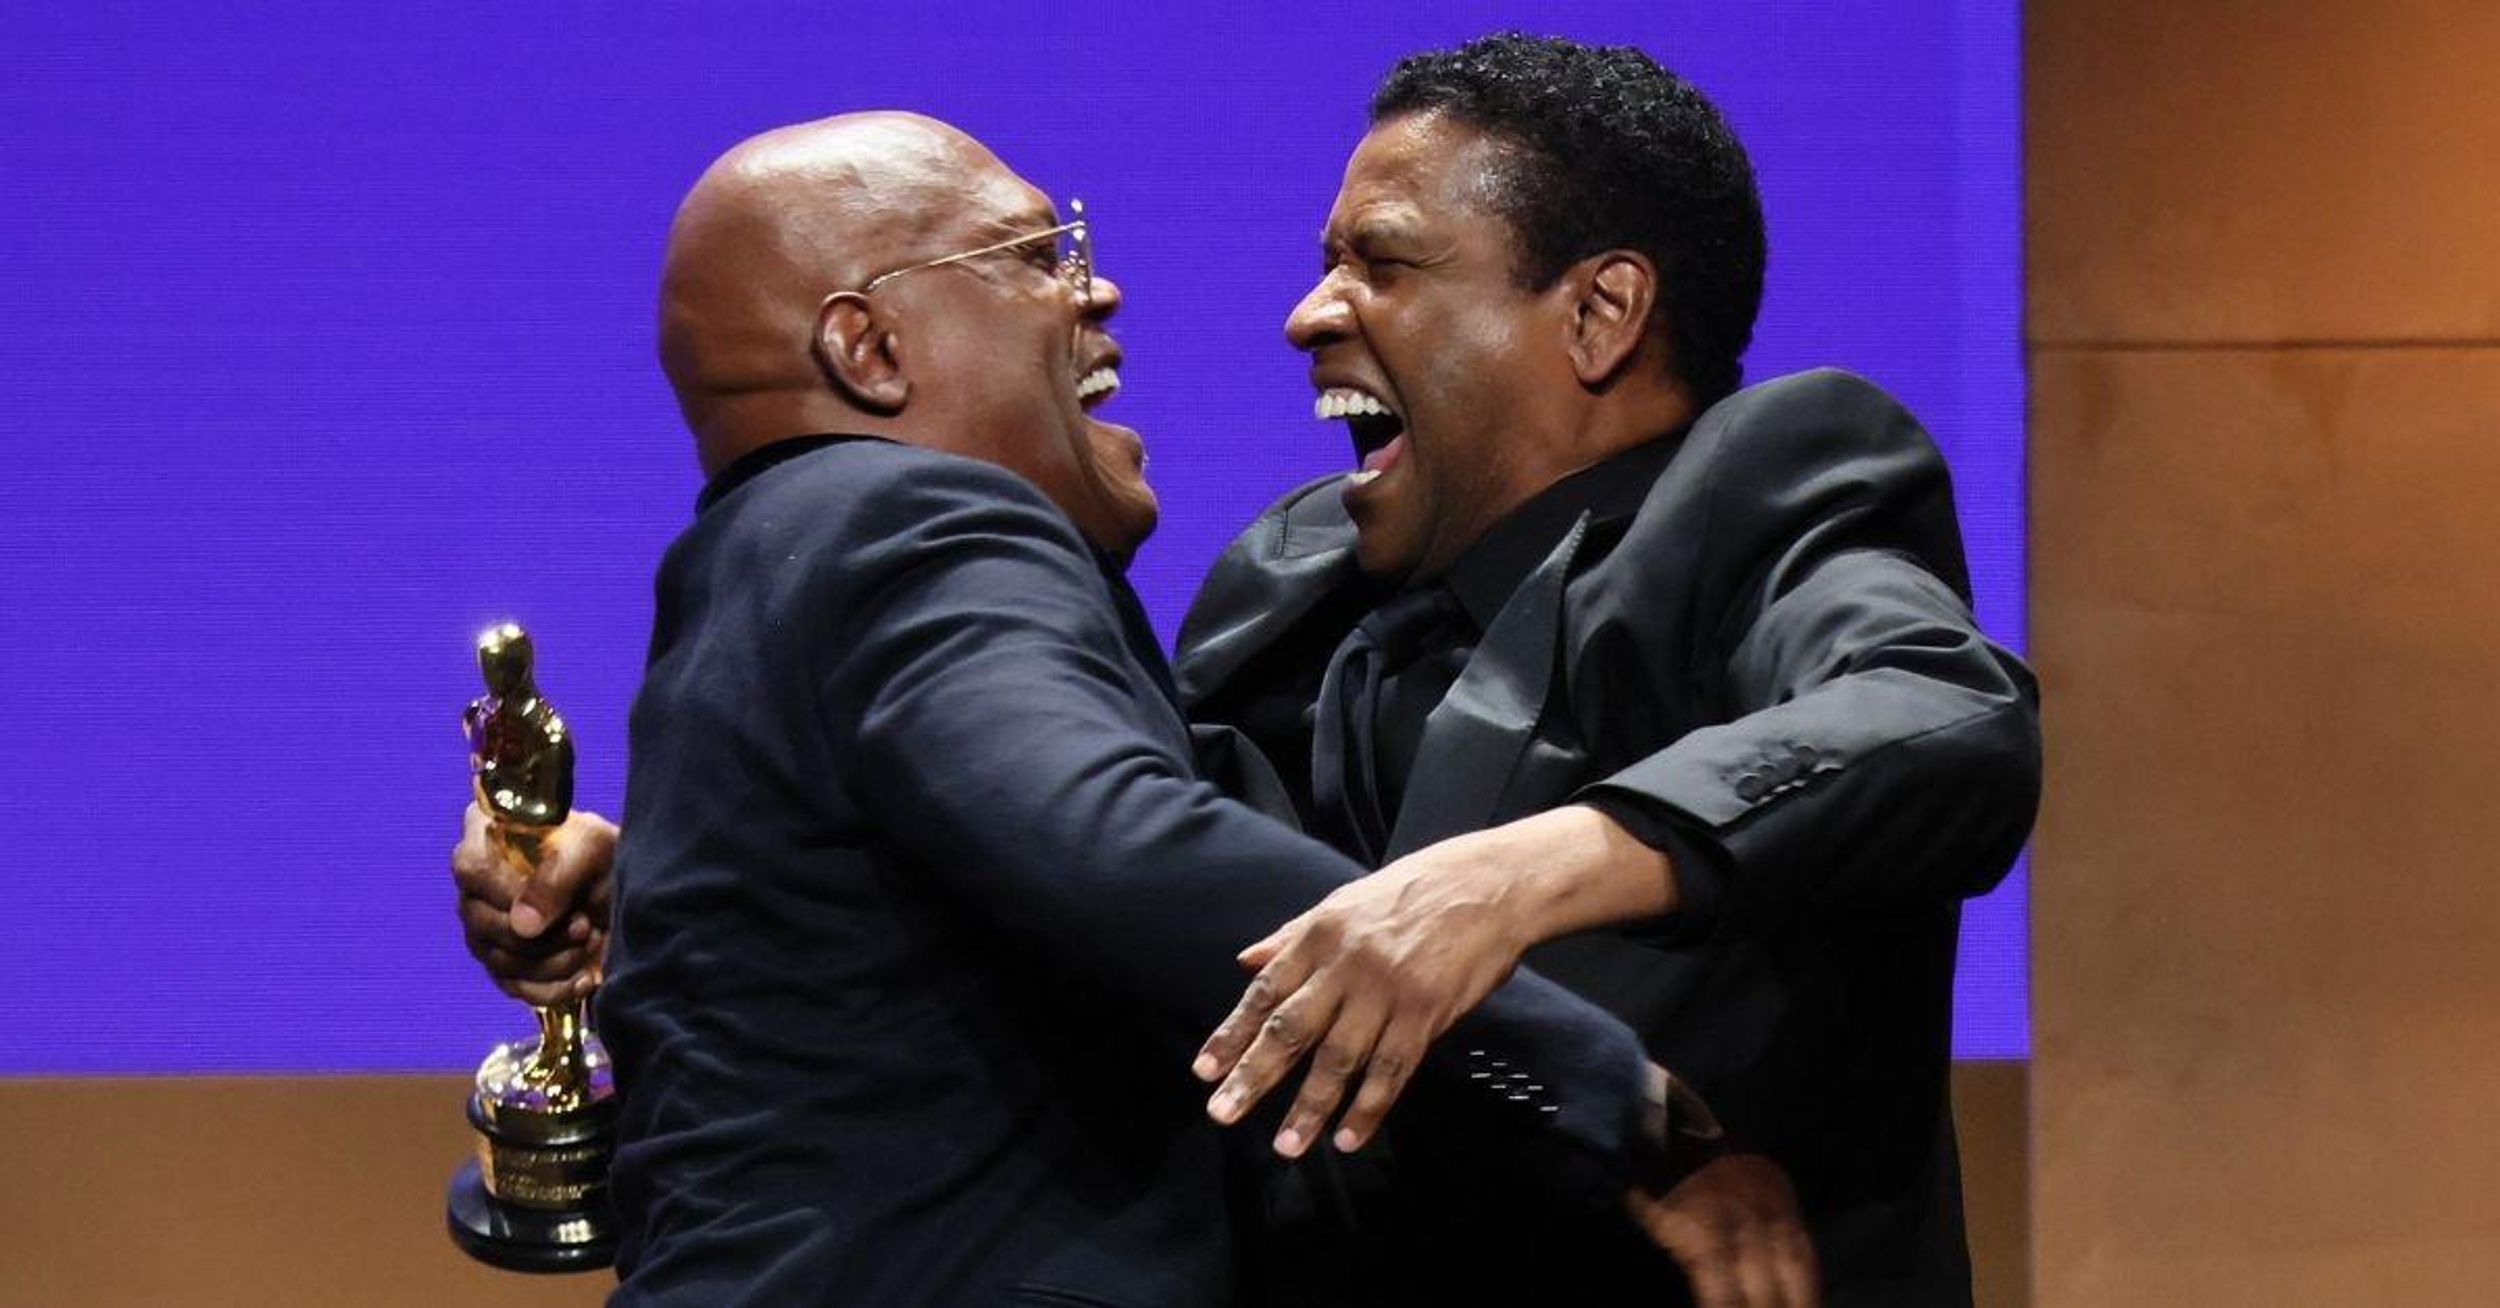 Denzel Washington Presented Honorary Oscar To Samuel L. Jackson Ahead Of Live Show—And Fans Are Pissed